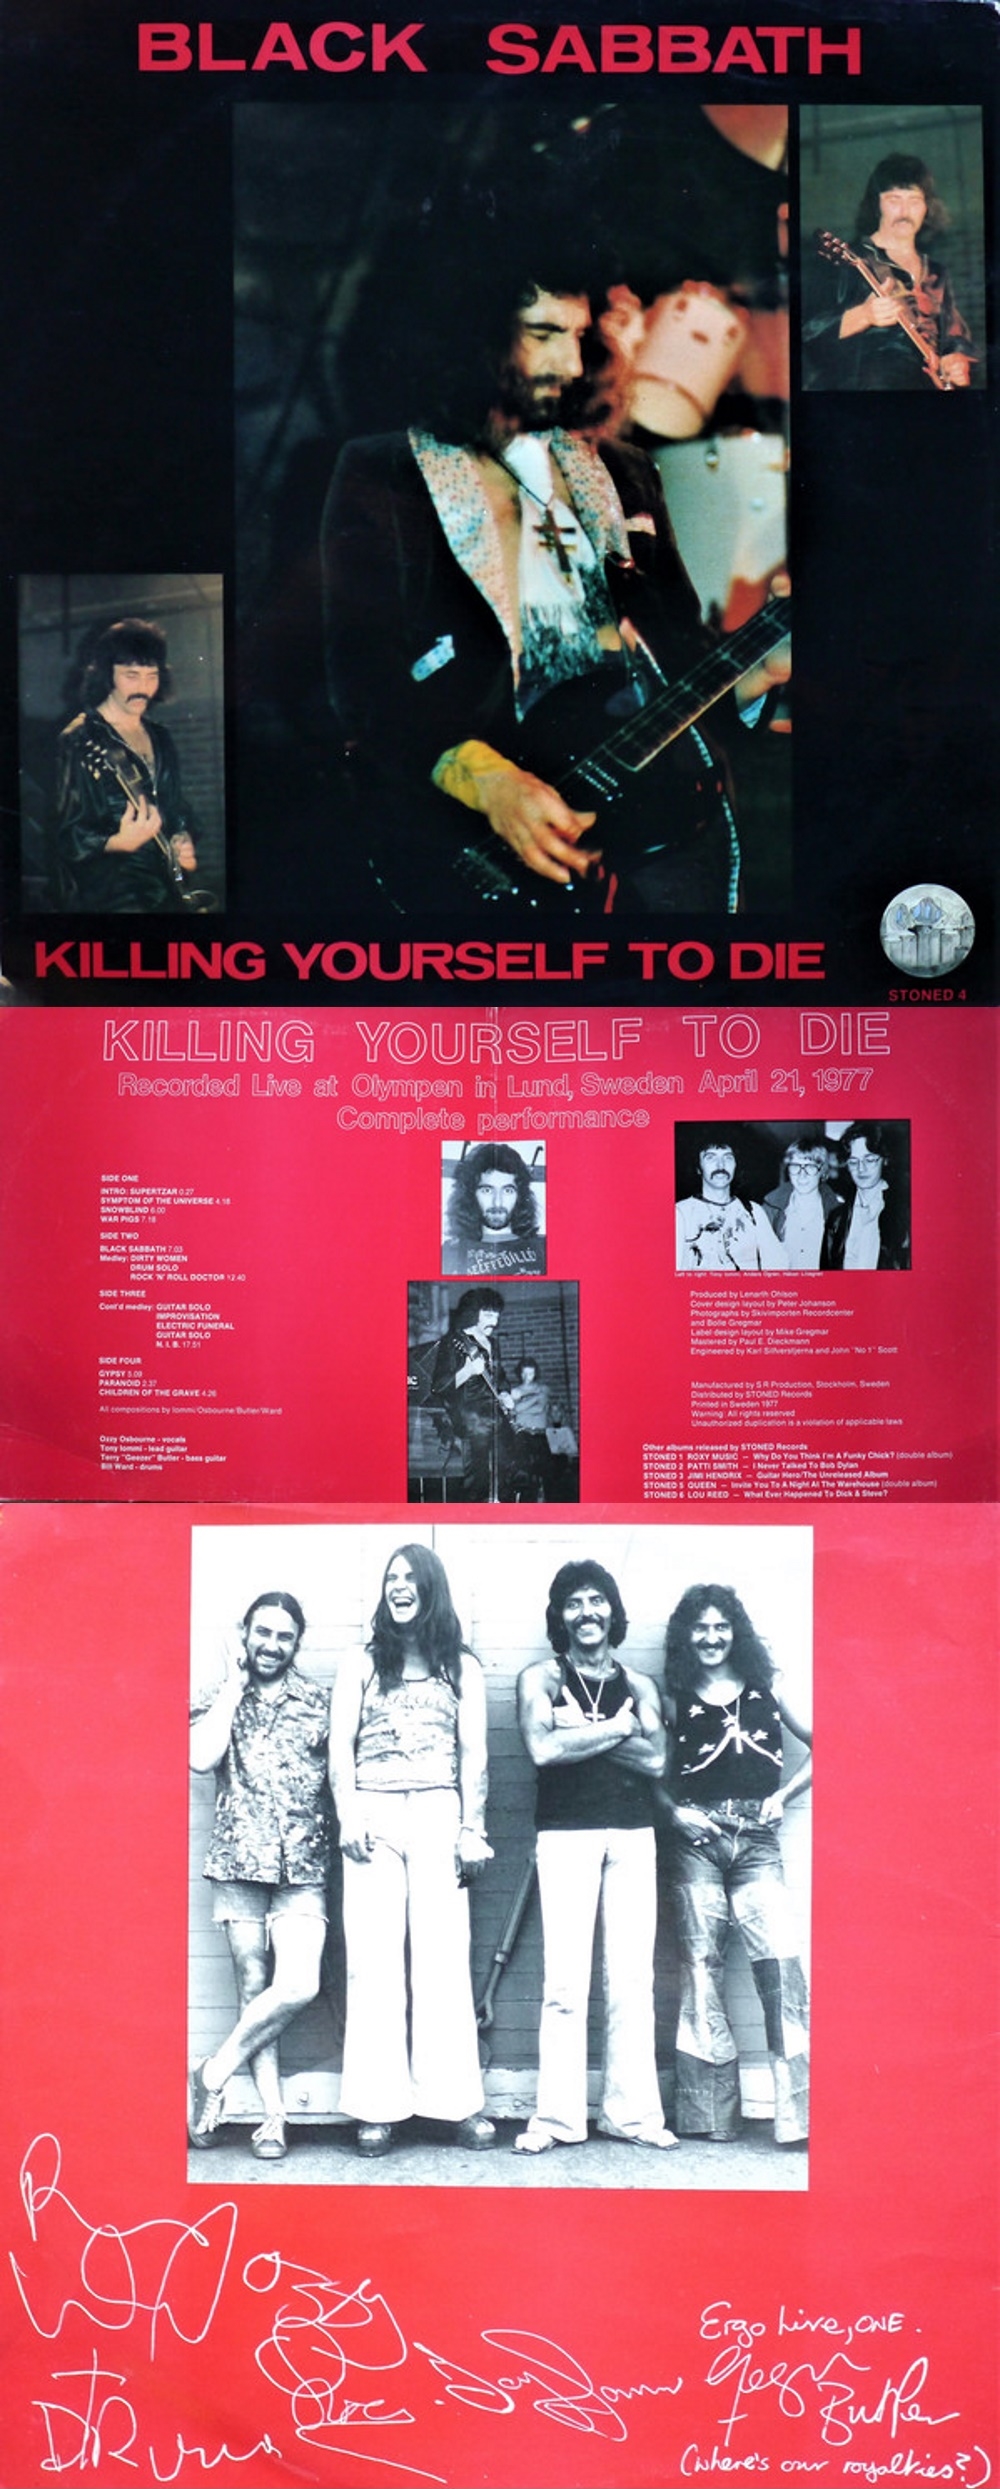 Stoned Records - Black Sabbath Killing Yourself To Die